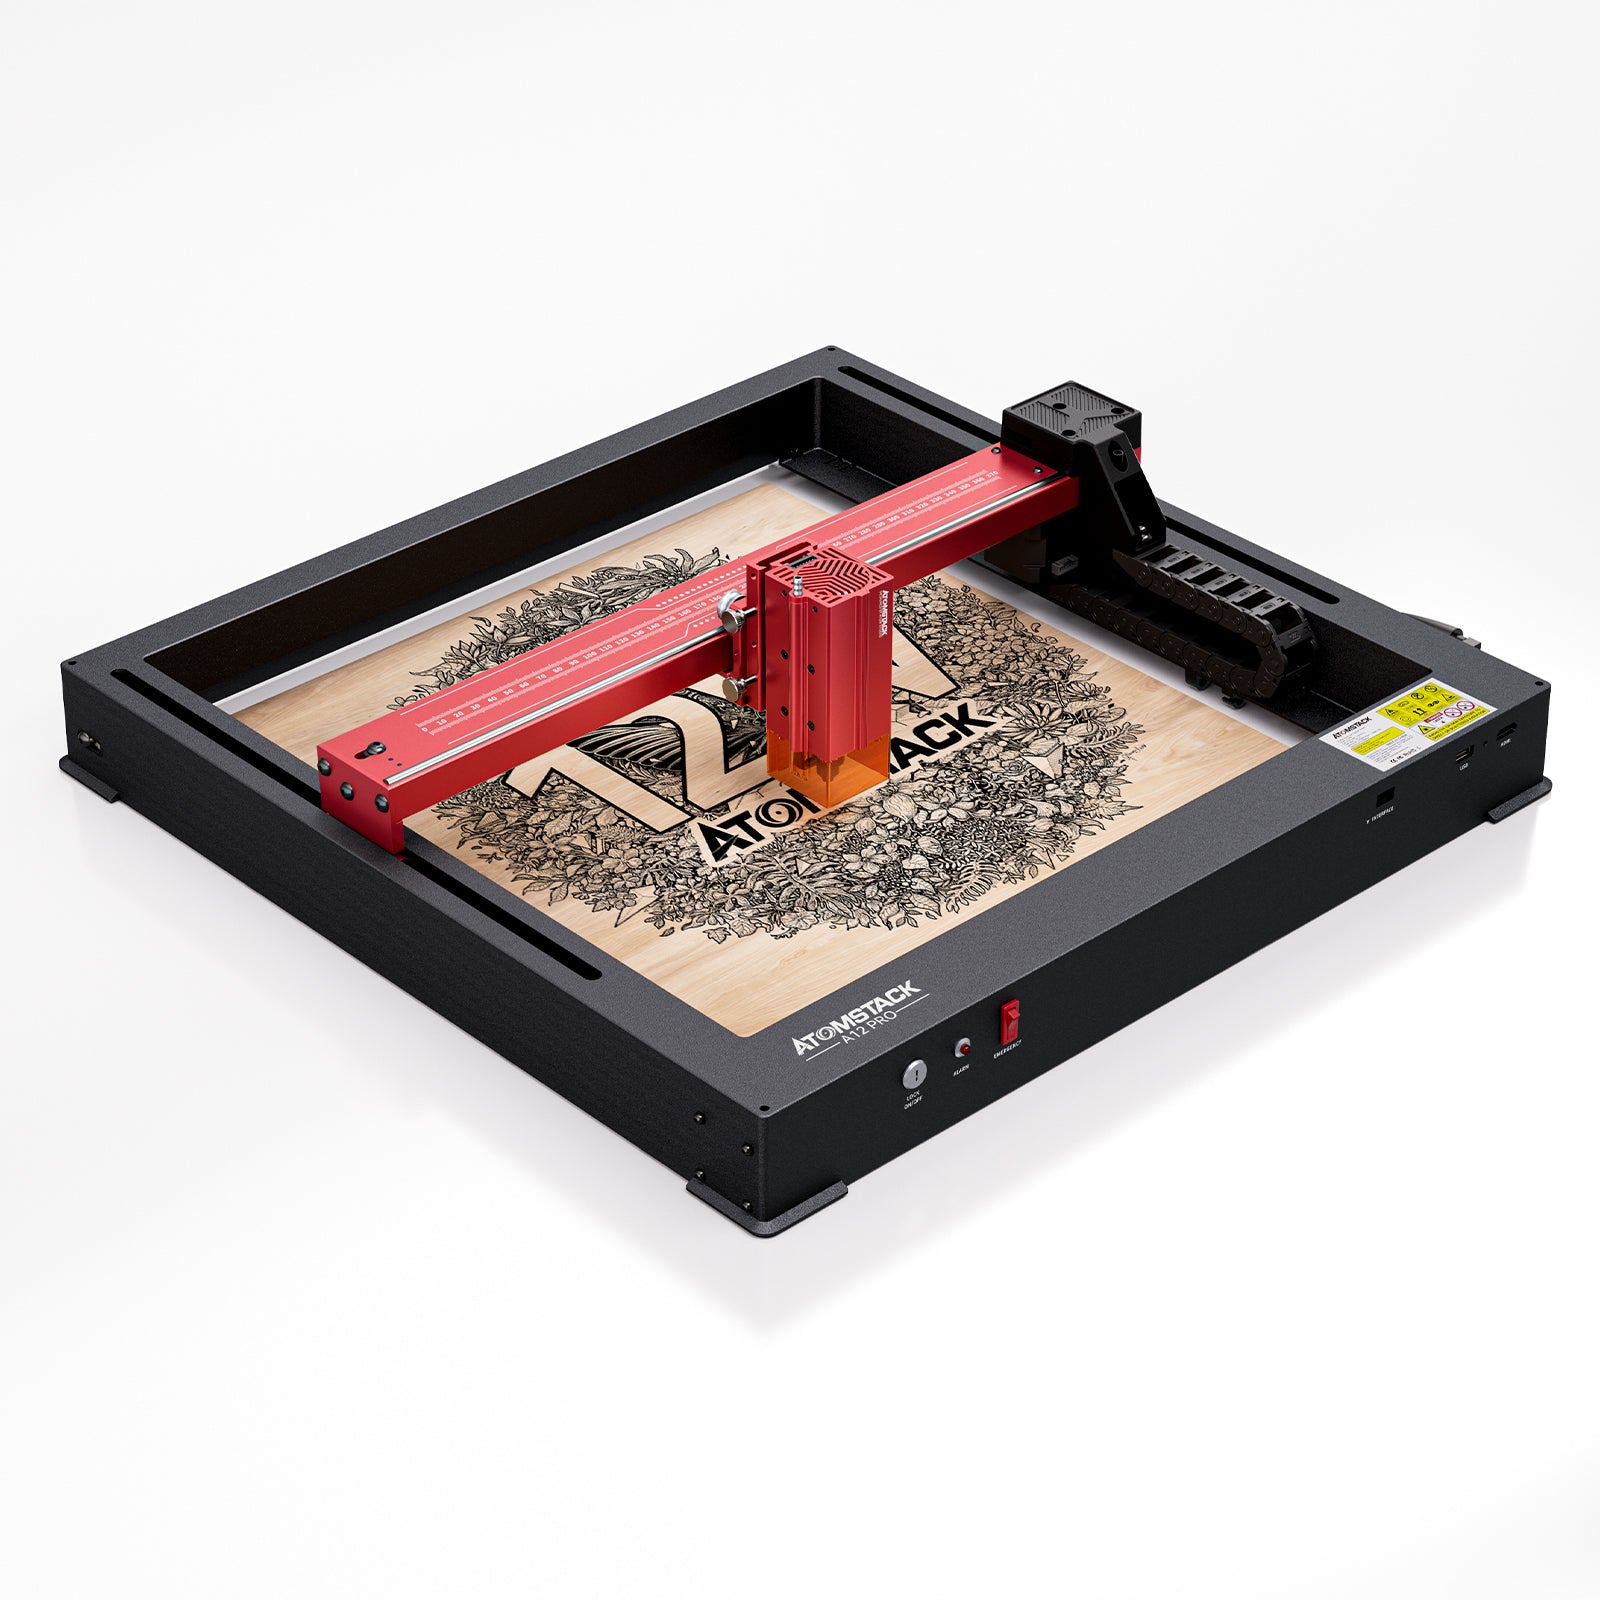 AtomStack A12 PRO Optical Power 12W Laser Engraver